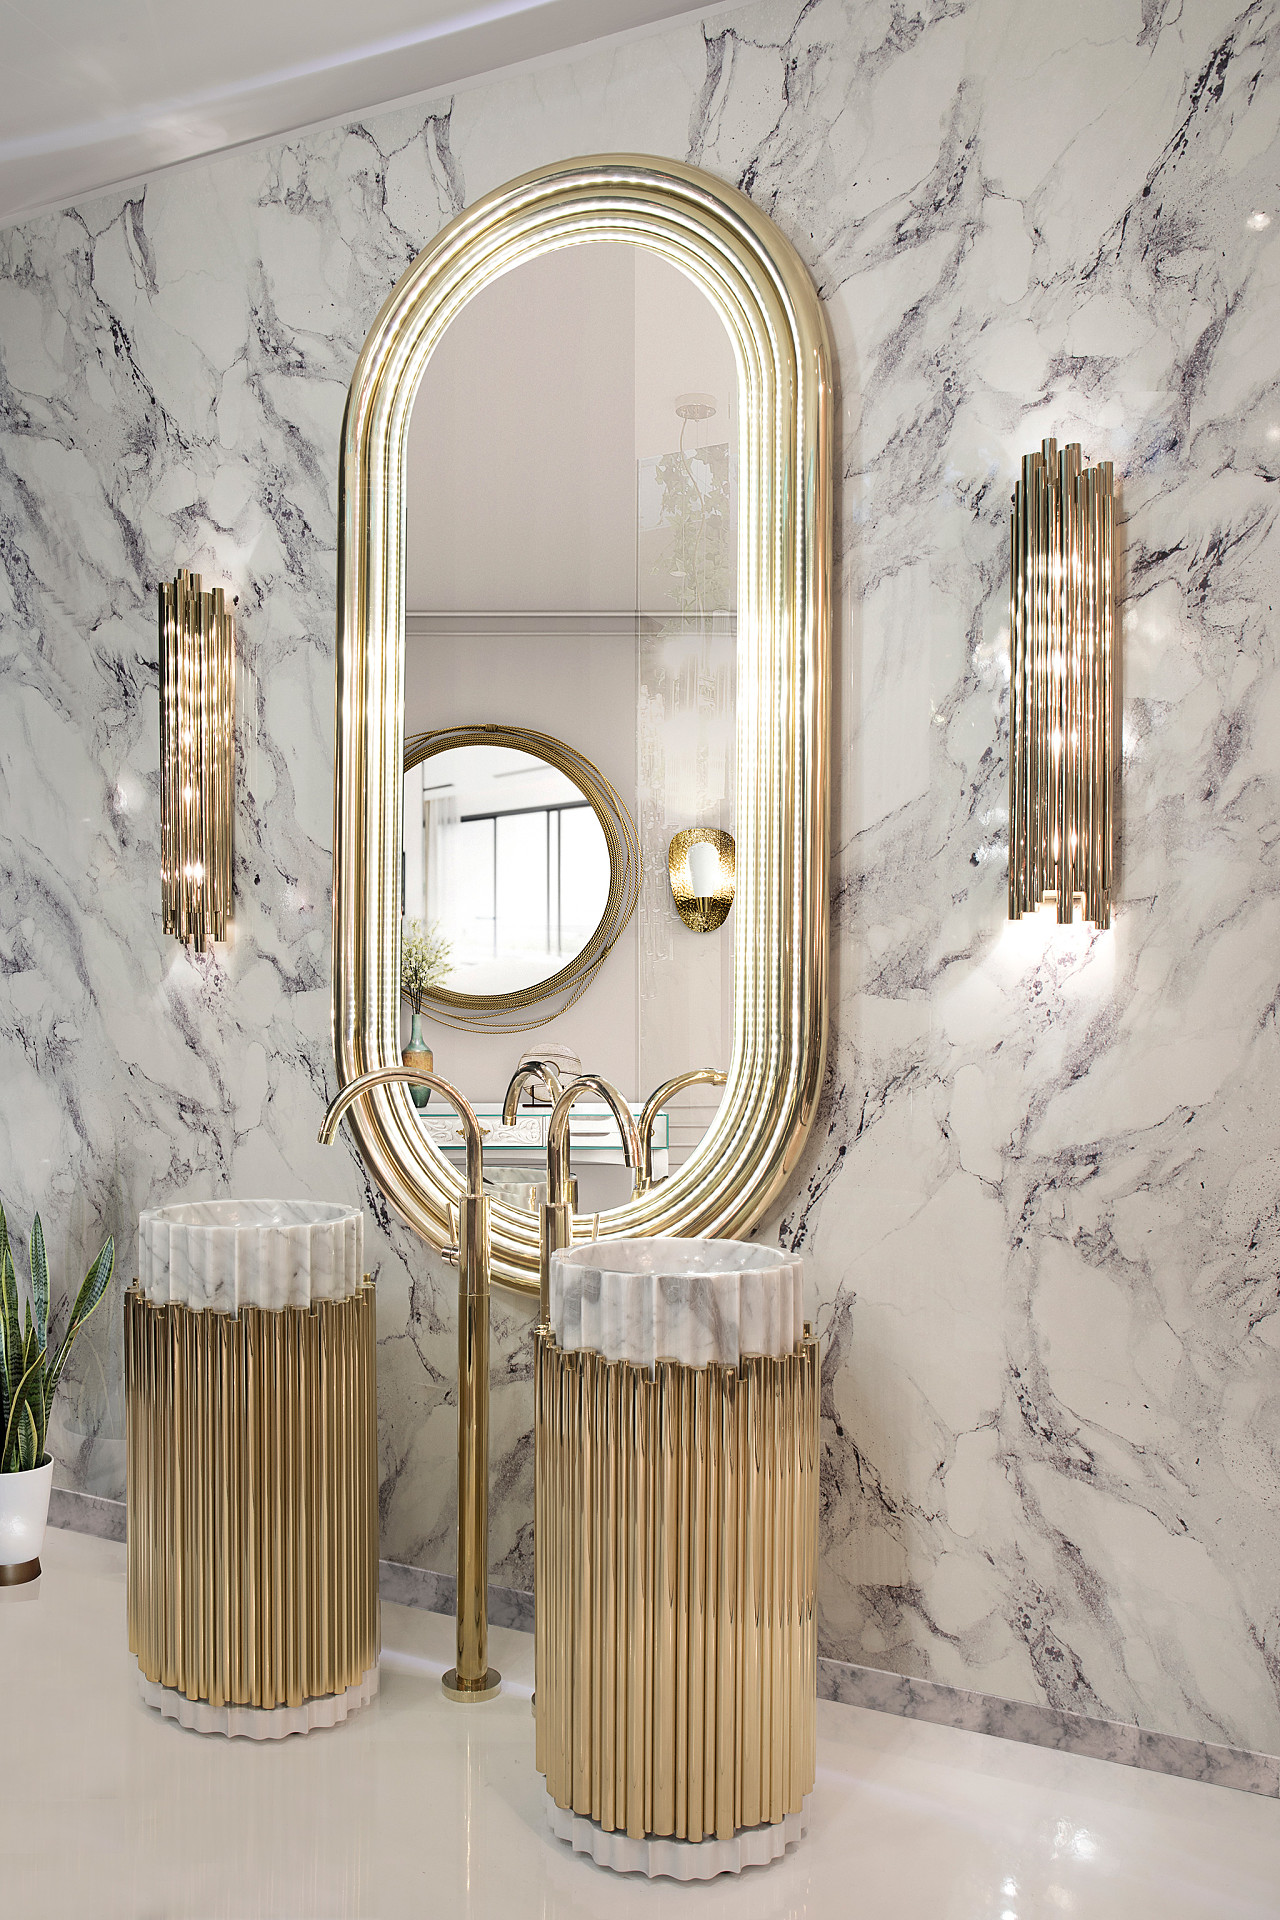 Metallic Accents Best +60 Ideas to Enhance Your Bathroom’s Luxuriousness - 32